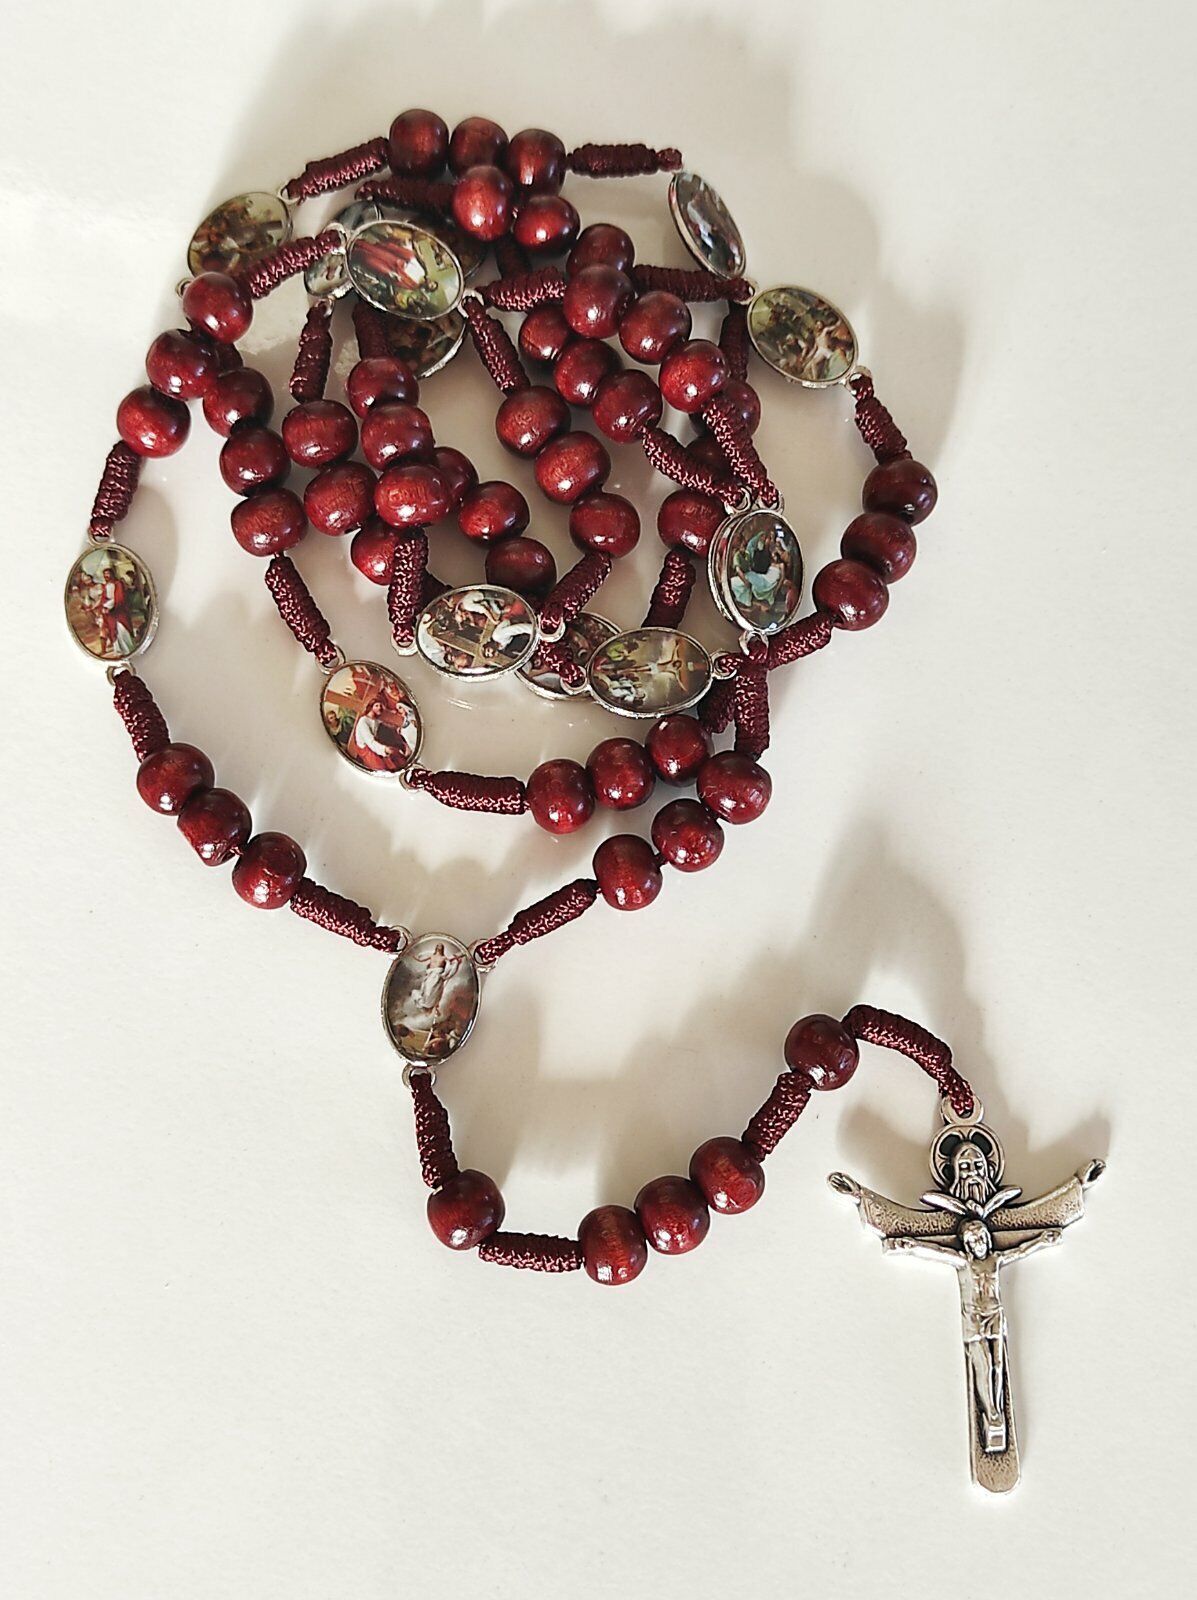 The Stations of the Cross Rosary made of  Wood The Way of the Cross Hply Spirit